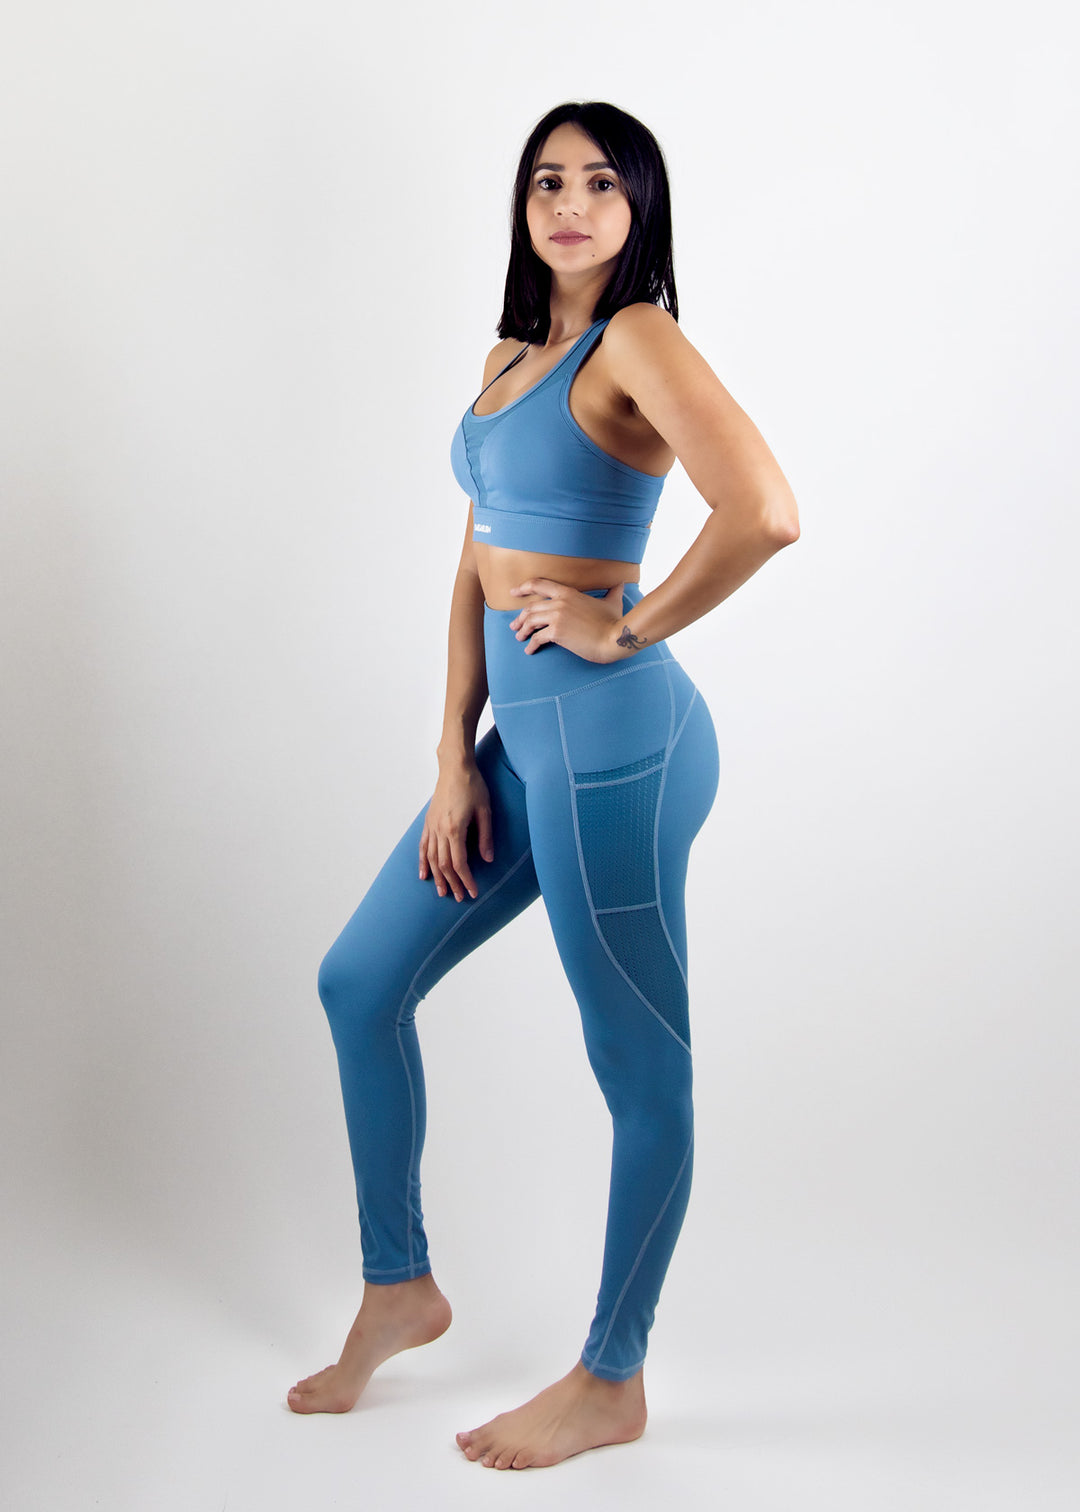 PIKADINGNIS Women's Yoga Outfits 2 Piece Set Sexy Workout Athletic